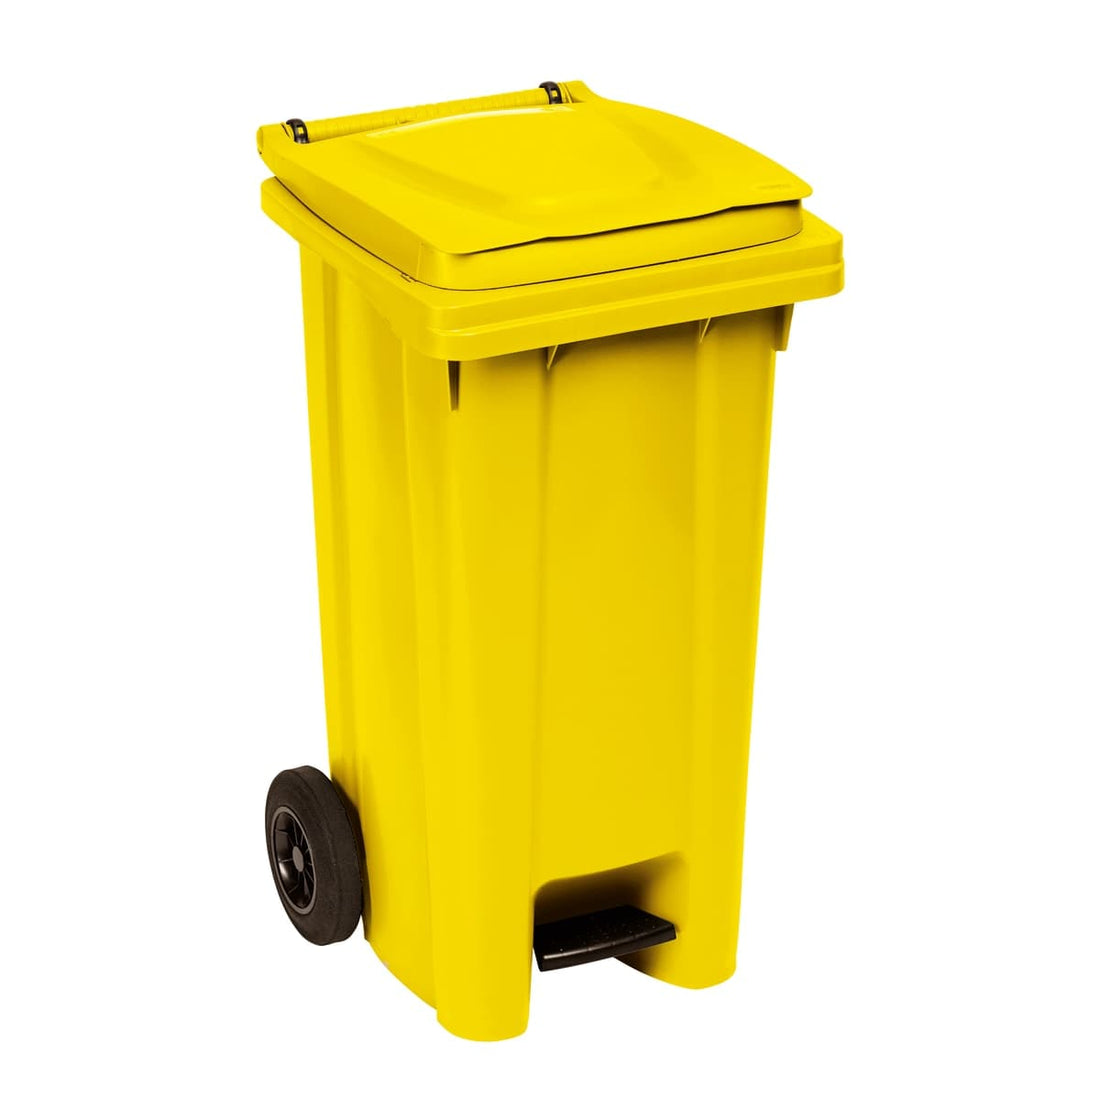 120LT WHEELED BIN WITH PEDAL SIGNAL YELLOW - best price from Maltashopper.com BR410007620